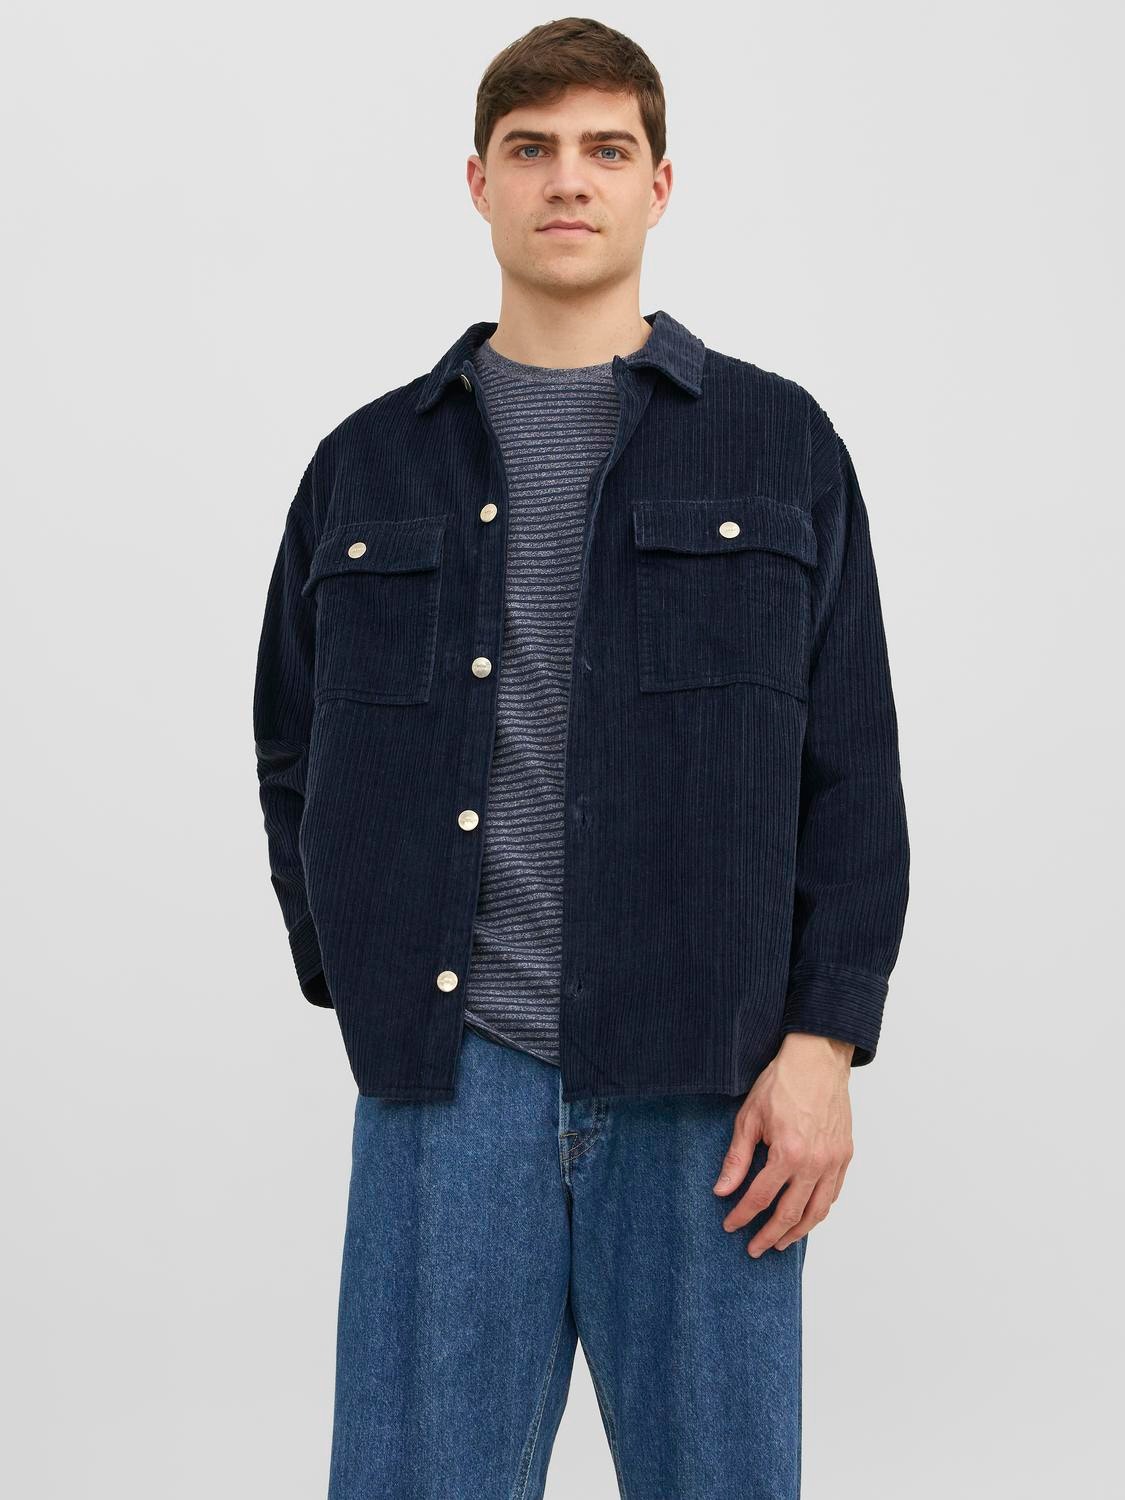 Jack & Jones πανωφόρι -Outer Space - 12239320